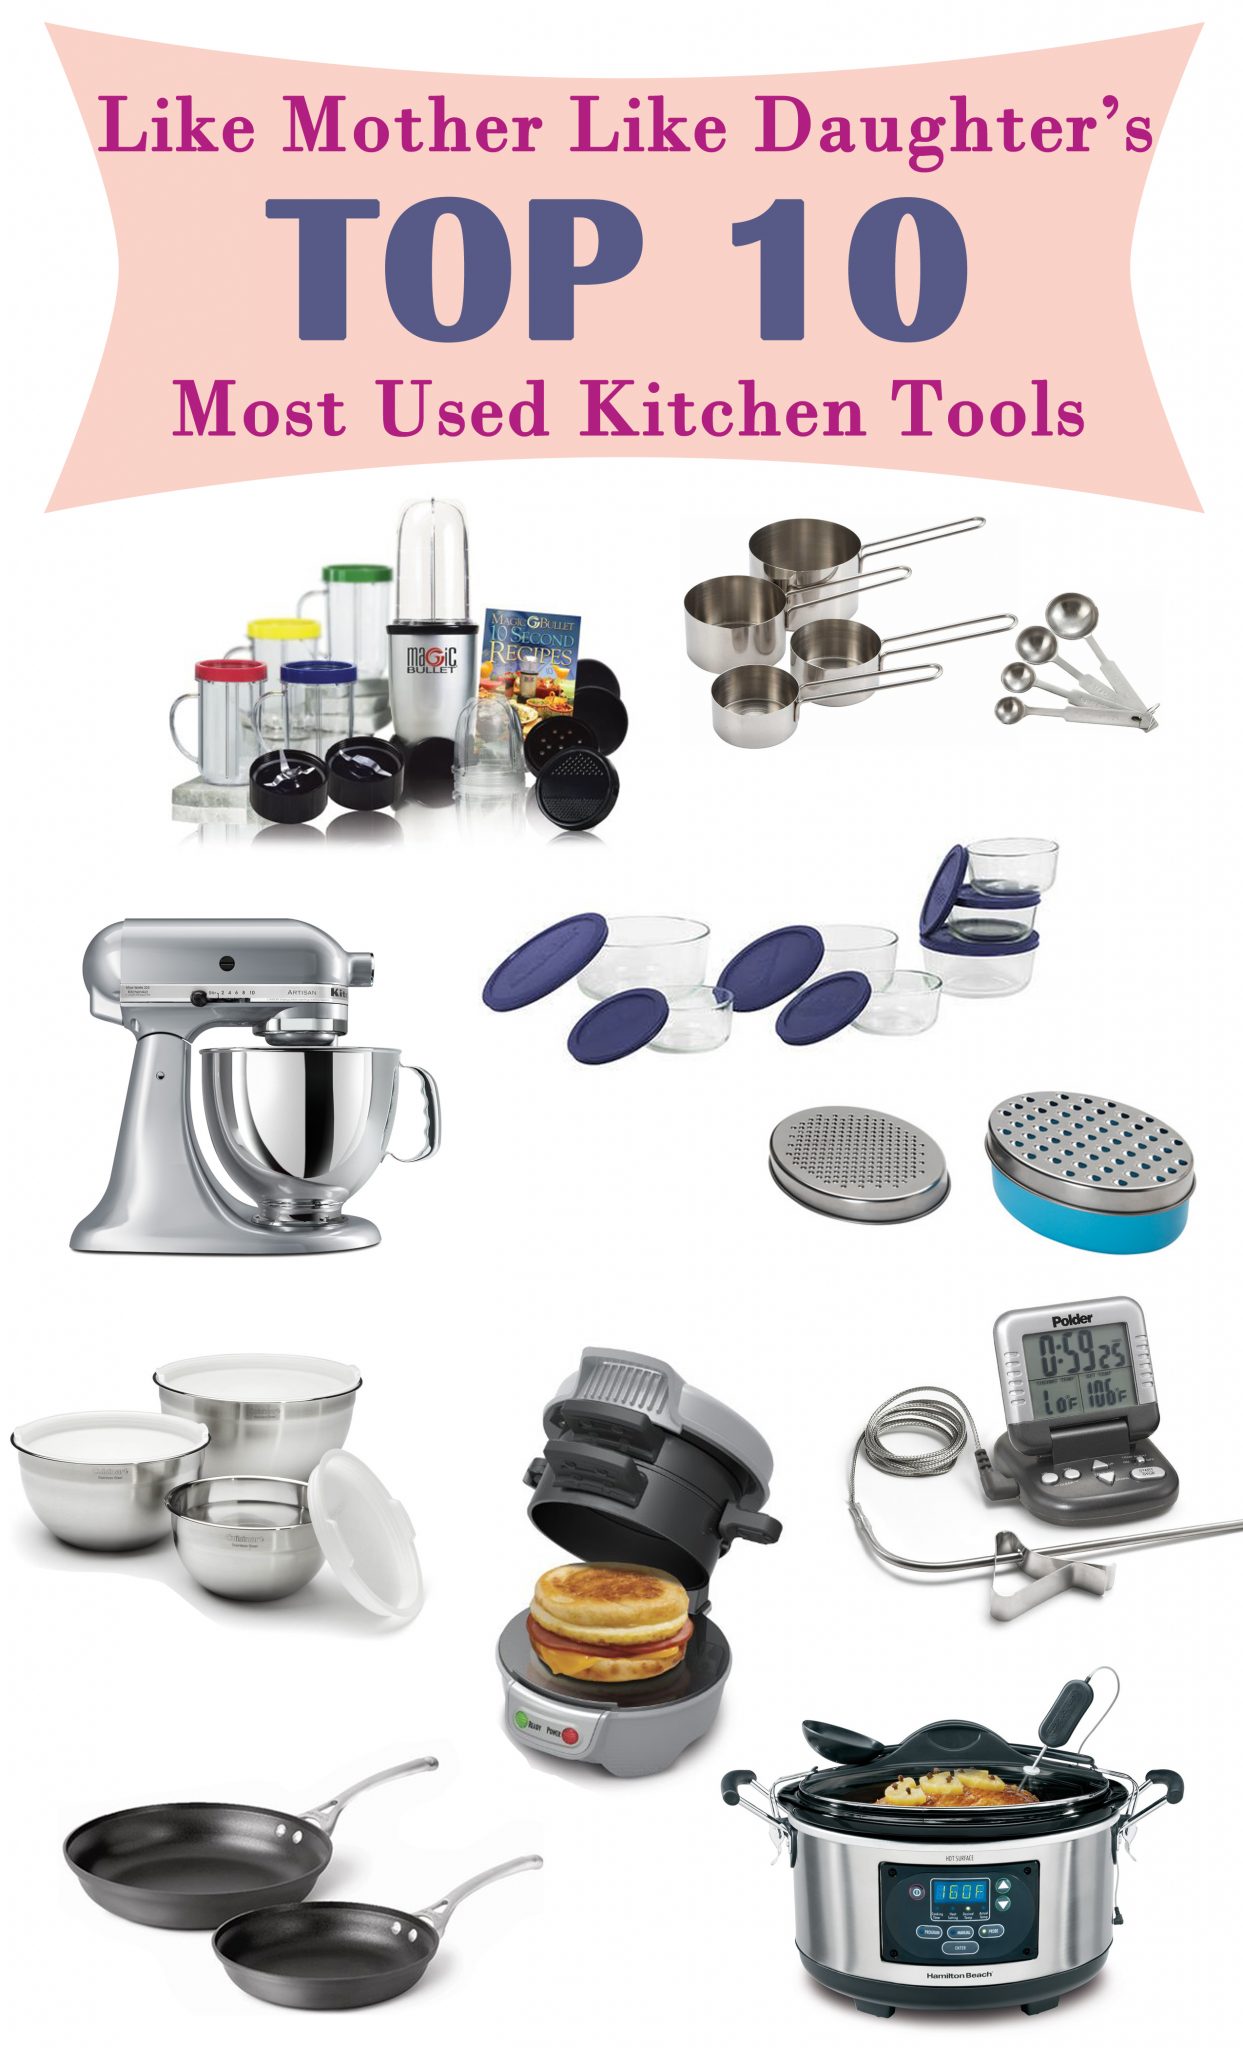 Top 10 Kitchen Tools used in LMLD Kitchens Like Mother, Like Daughter